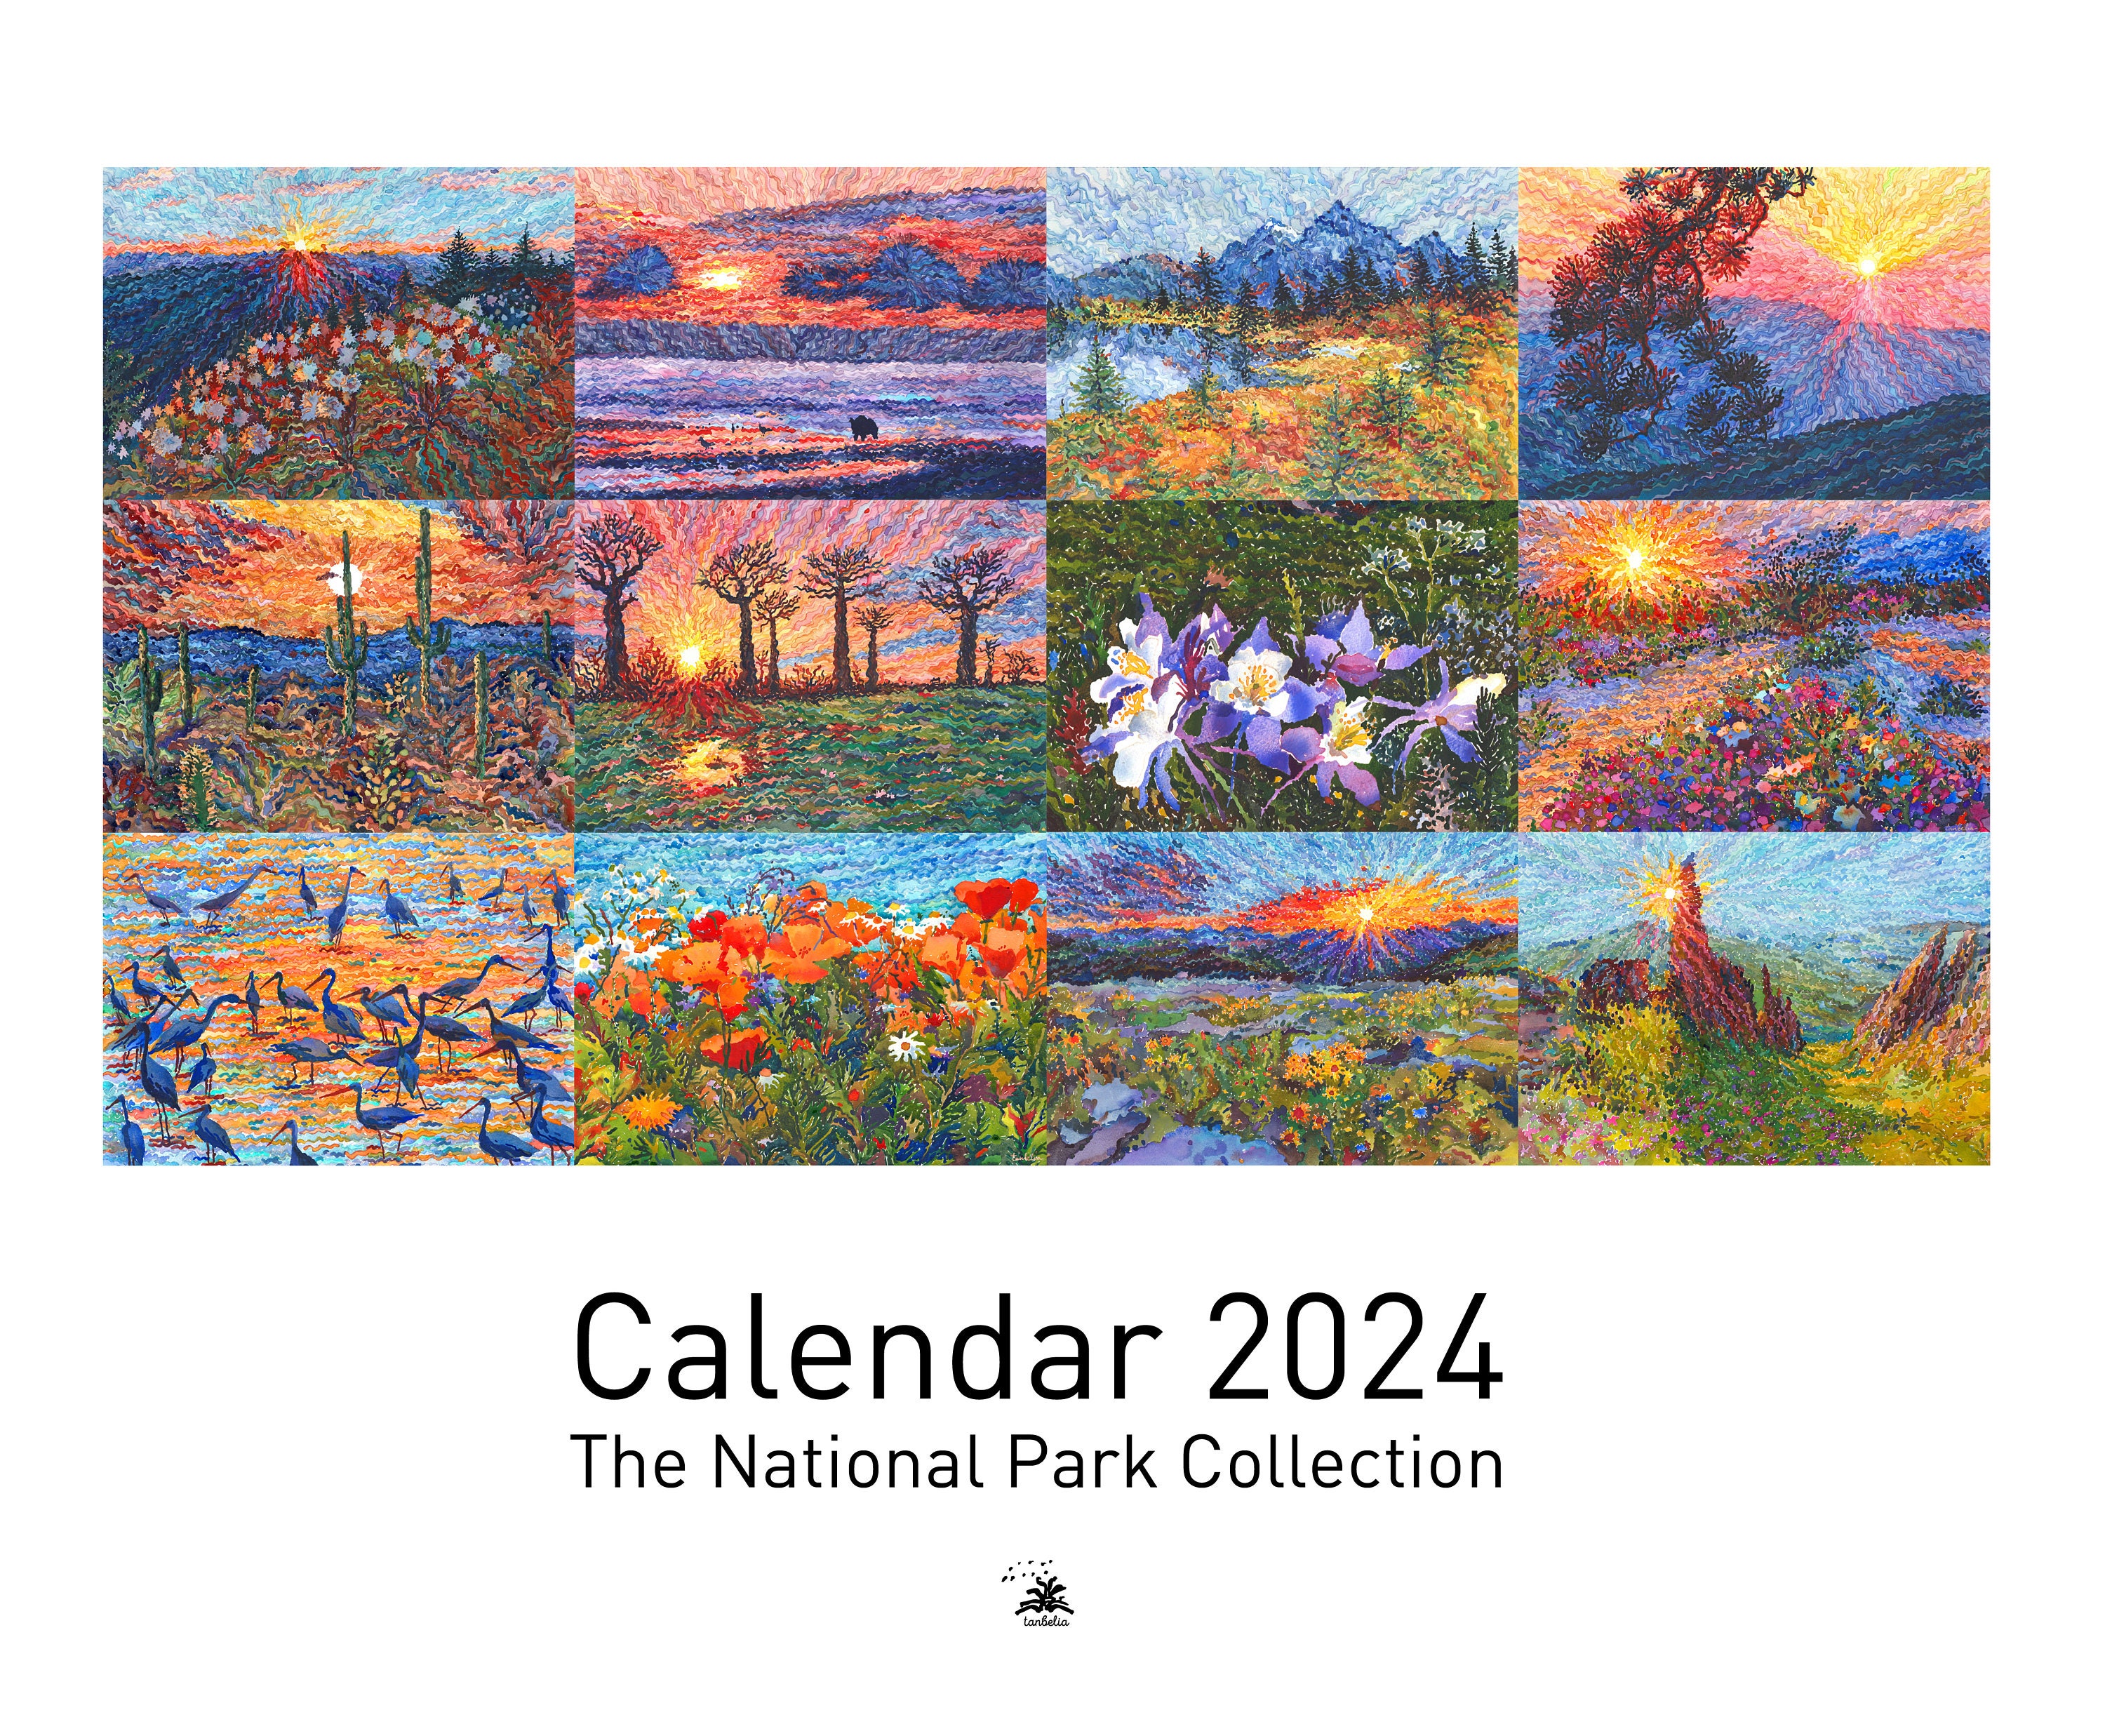 Calendrier Mural 2024 - 30 x 29 cm SUNSETS